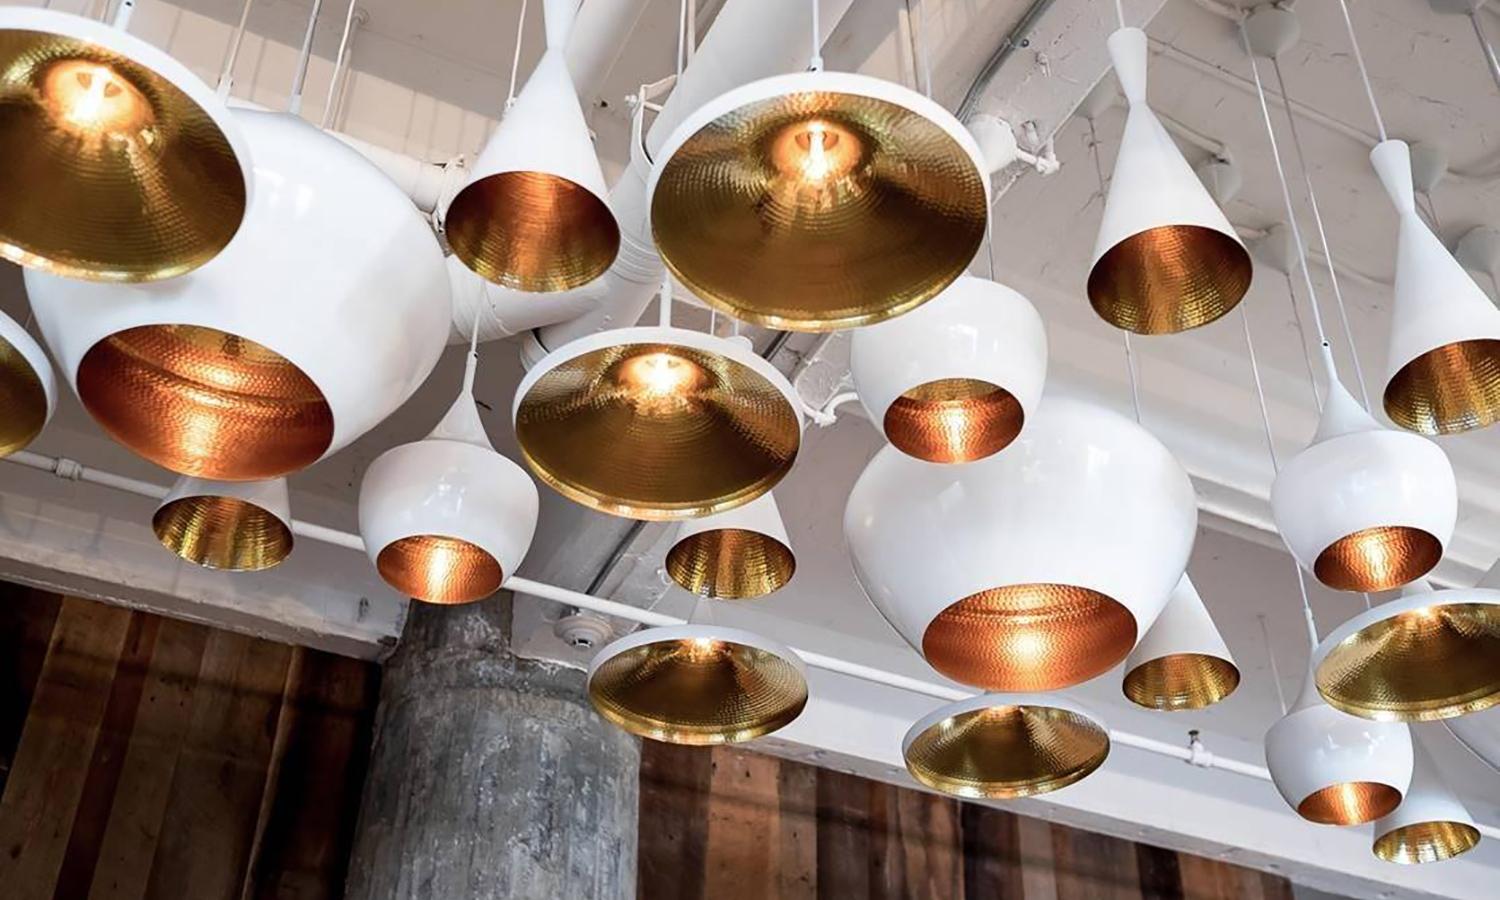 Minimal Tom Dixon beat fat white pendant light fixture, contemporary. Gorgeous piece. Retails for 575 USD. 
The Tom Dixon beat fat pendant is part of a series of lights inspired by the handmade brass cooking pots and water vessels found in India.